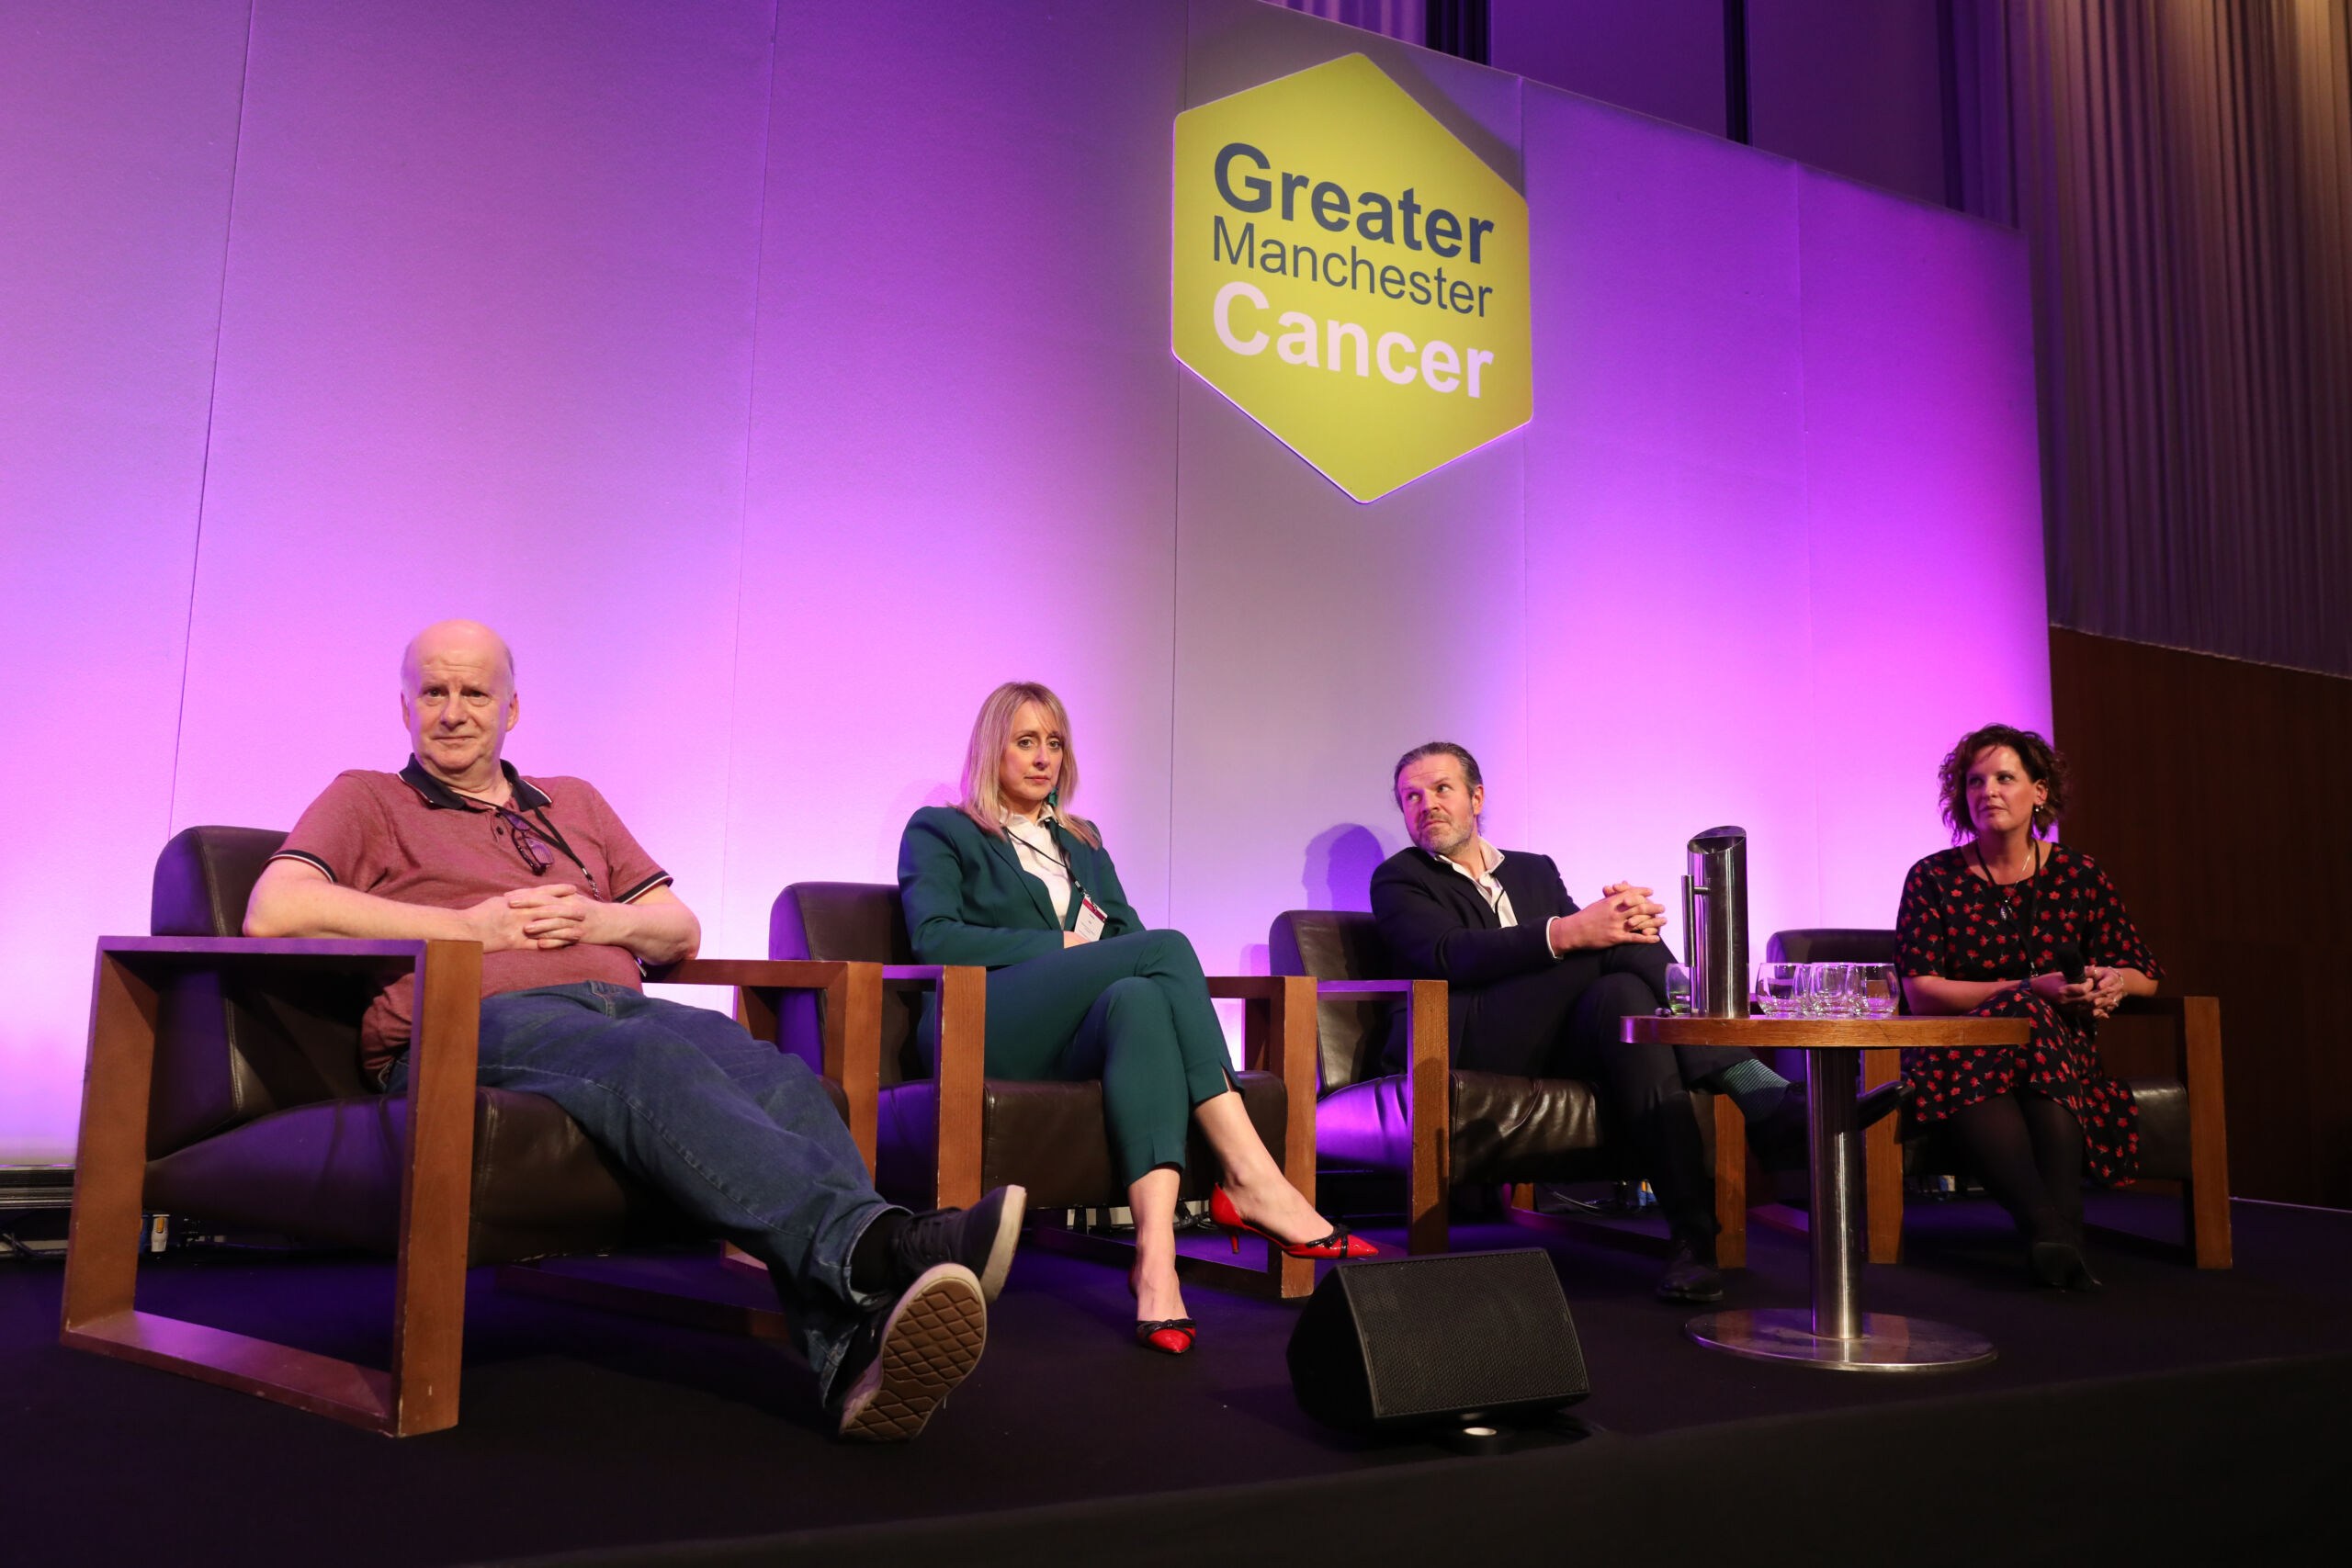 A panel of four speakers sit on low comfy chairs on stage with a green hexagon and the words Greater Manchester Cancer behind them.